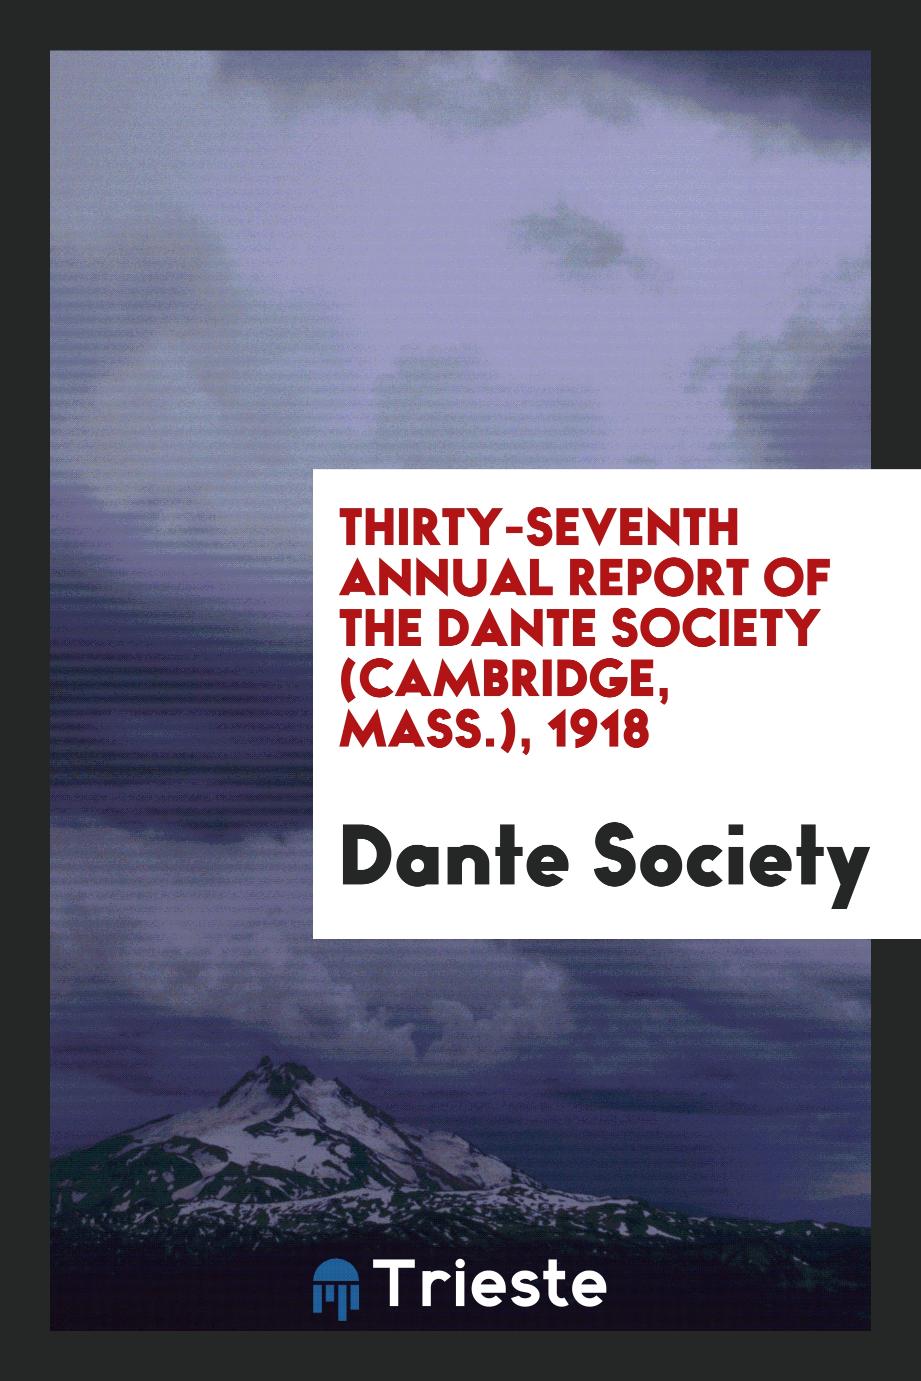 Thirty-seventh Annual report of the Dante Society (Cambridge, mass.), 1918